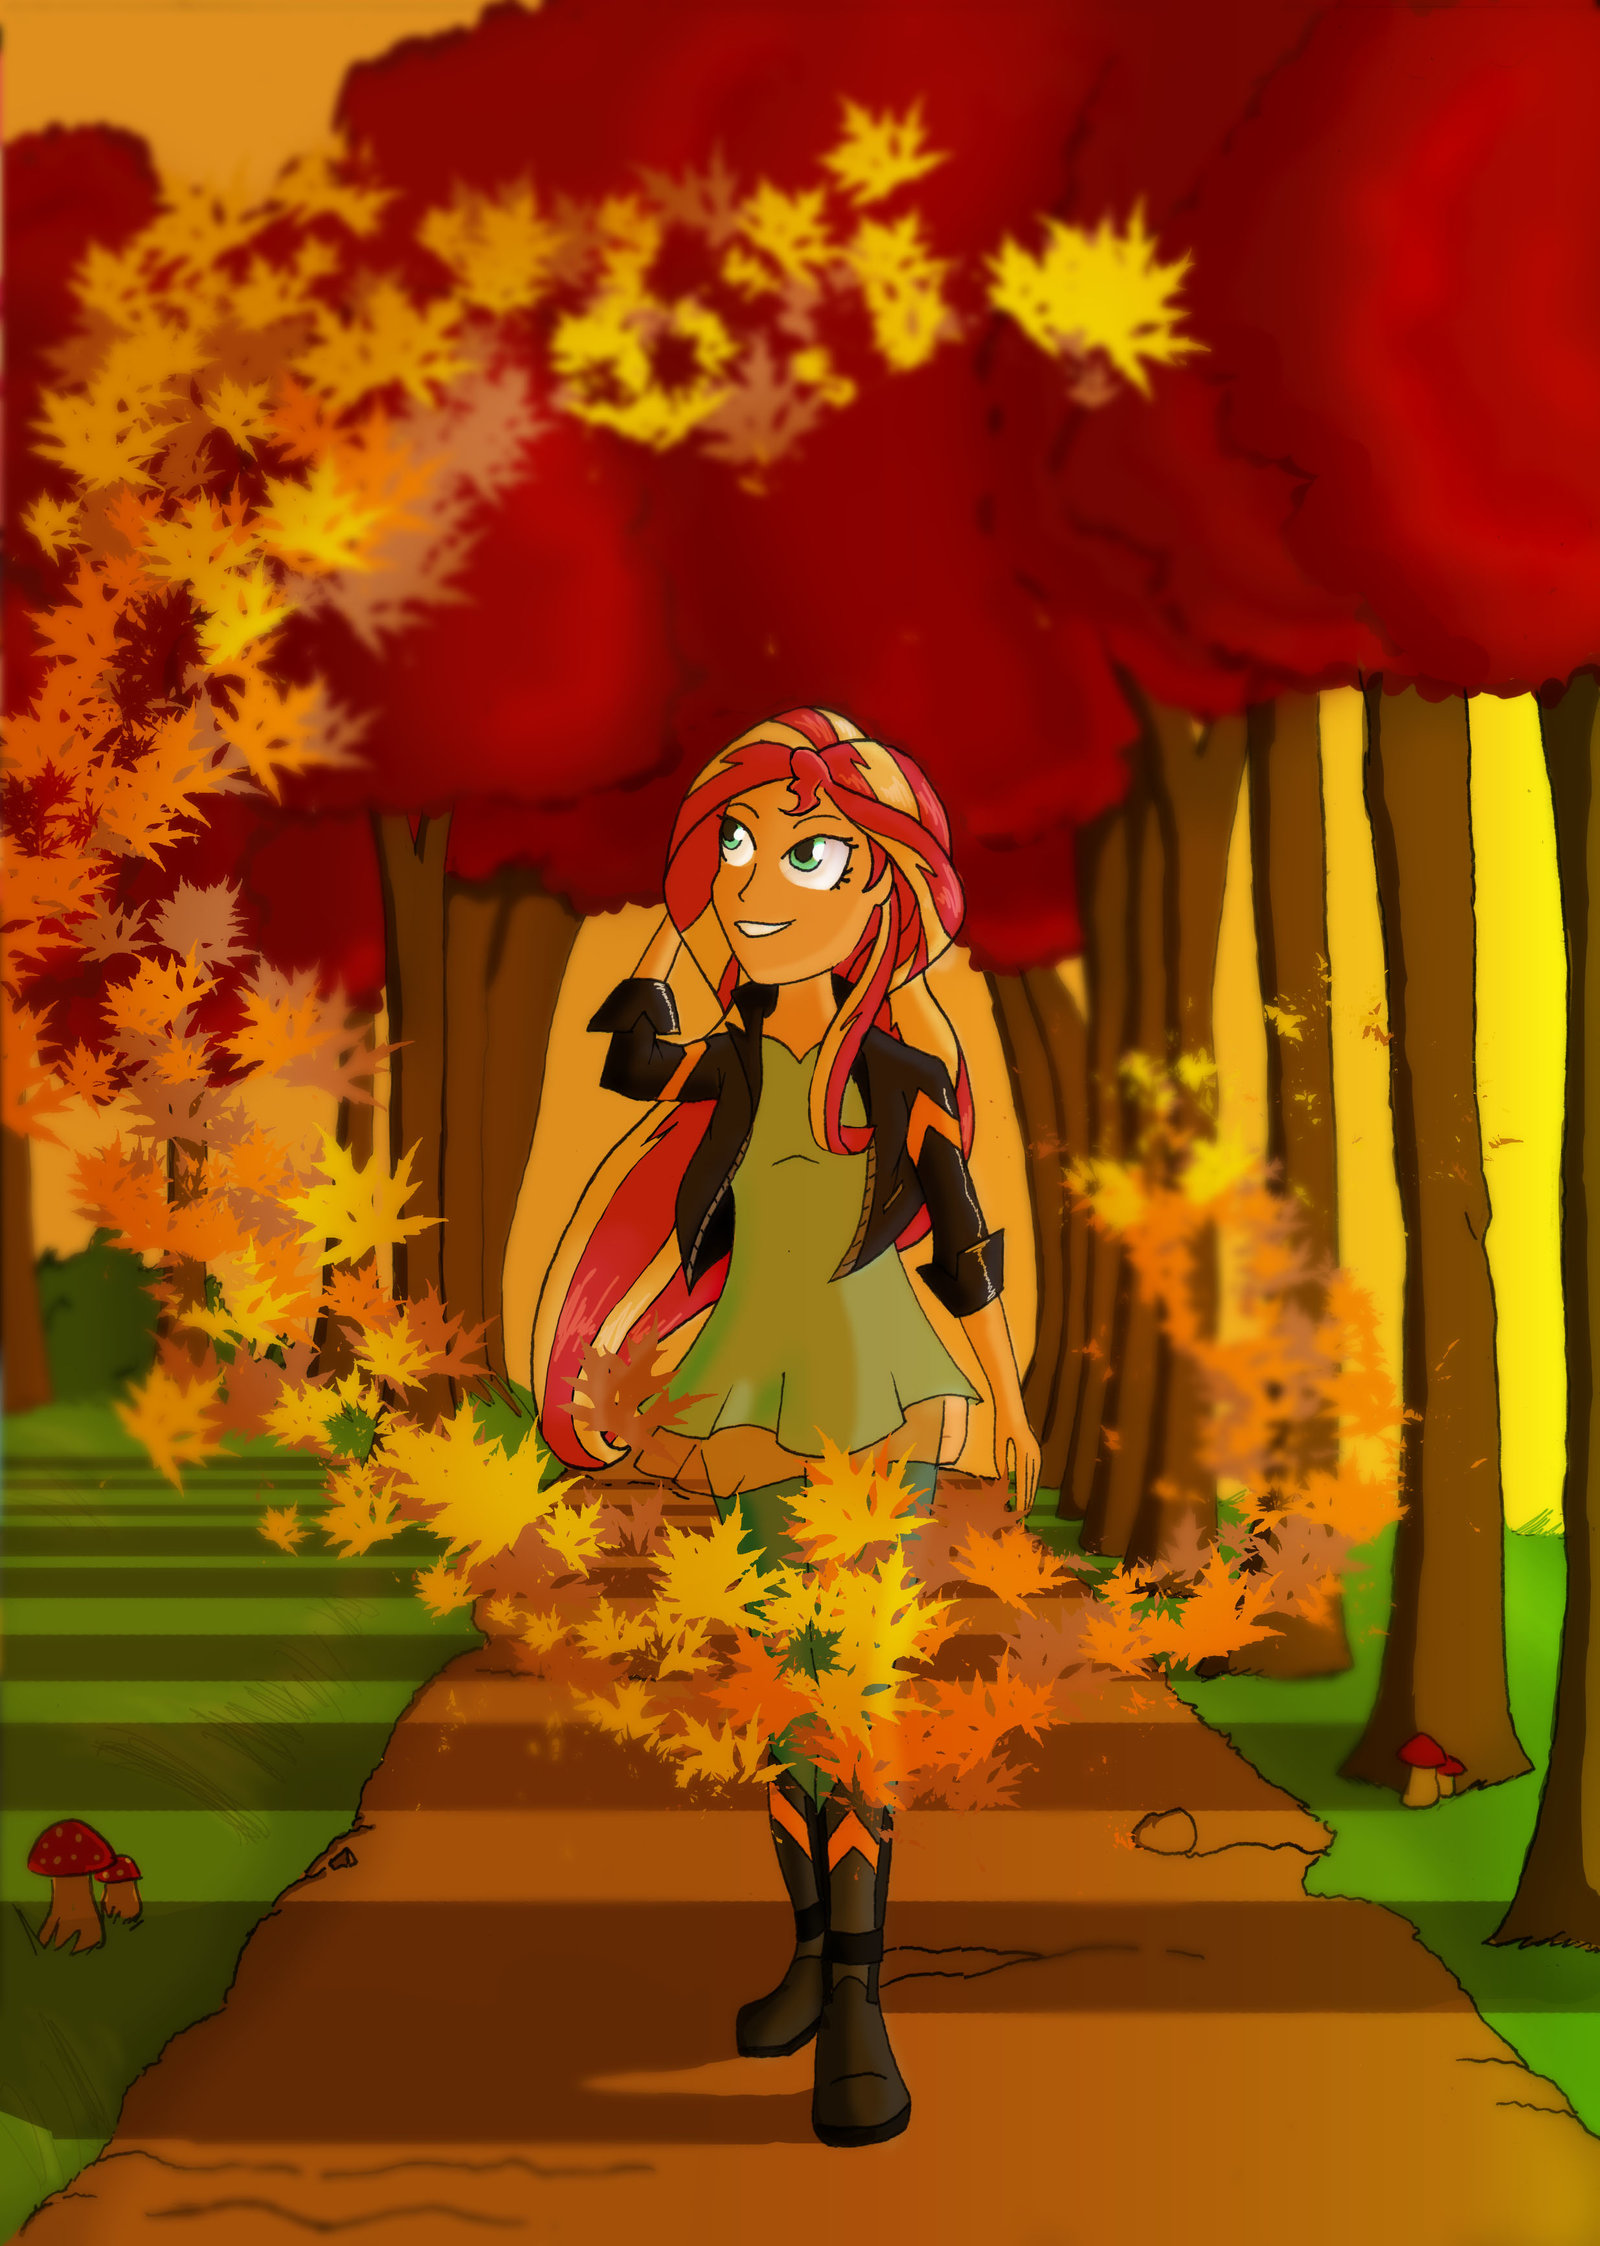 sunset___autumnal_equinox_by_papyjr13-db